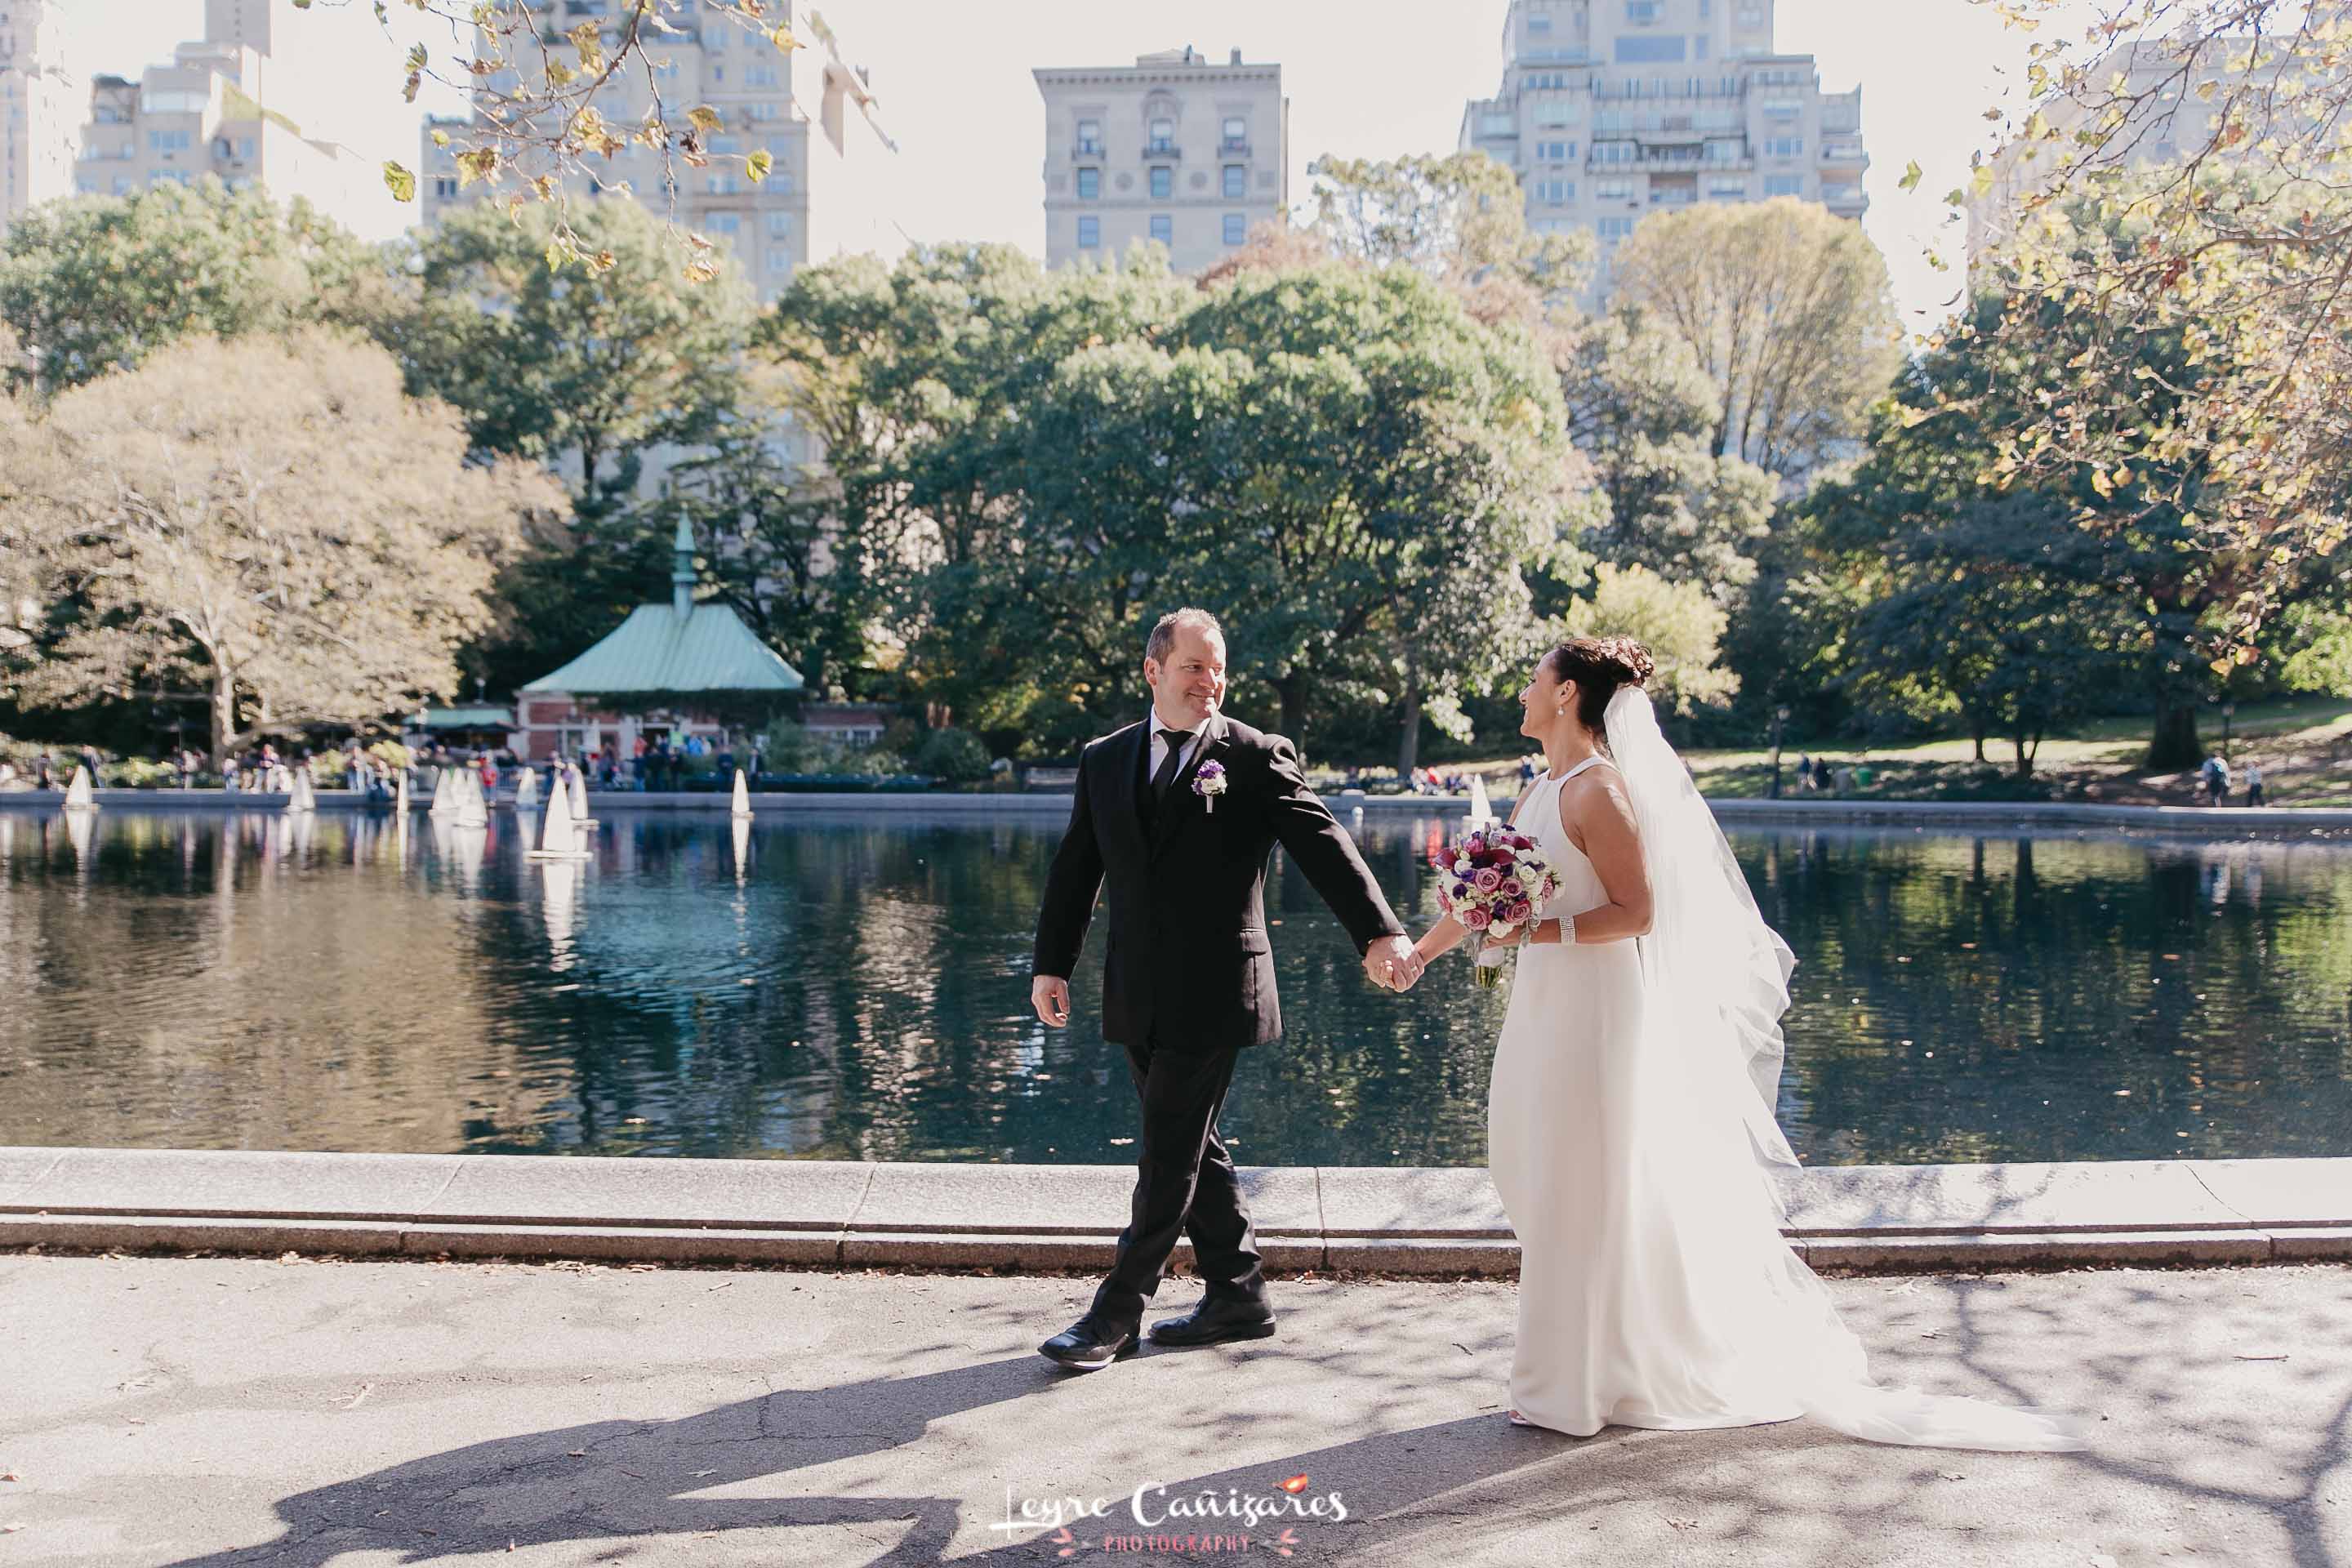 lovely elopement in Central Park, nyc